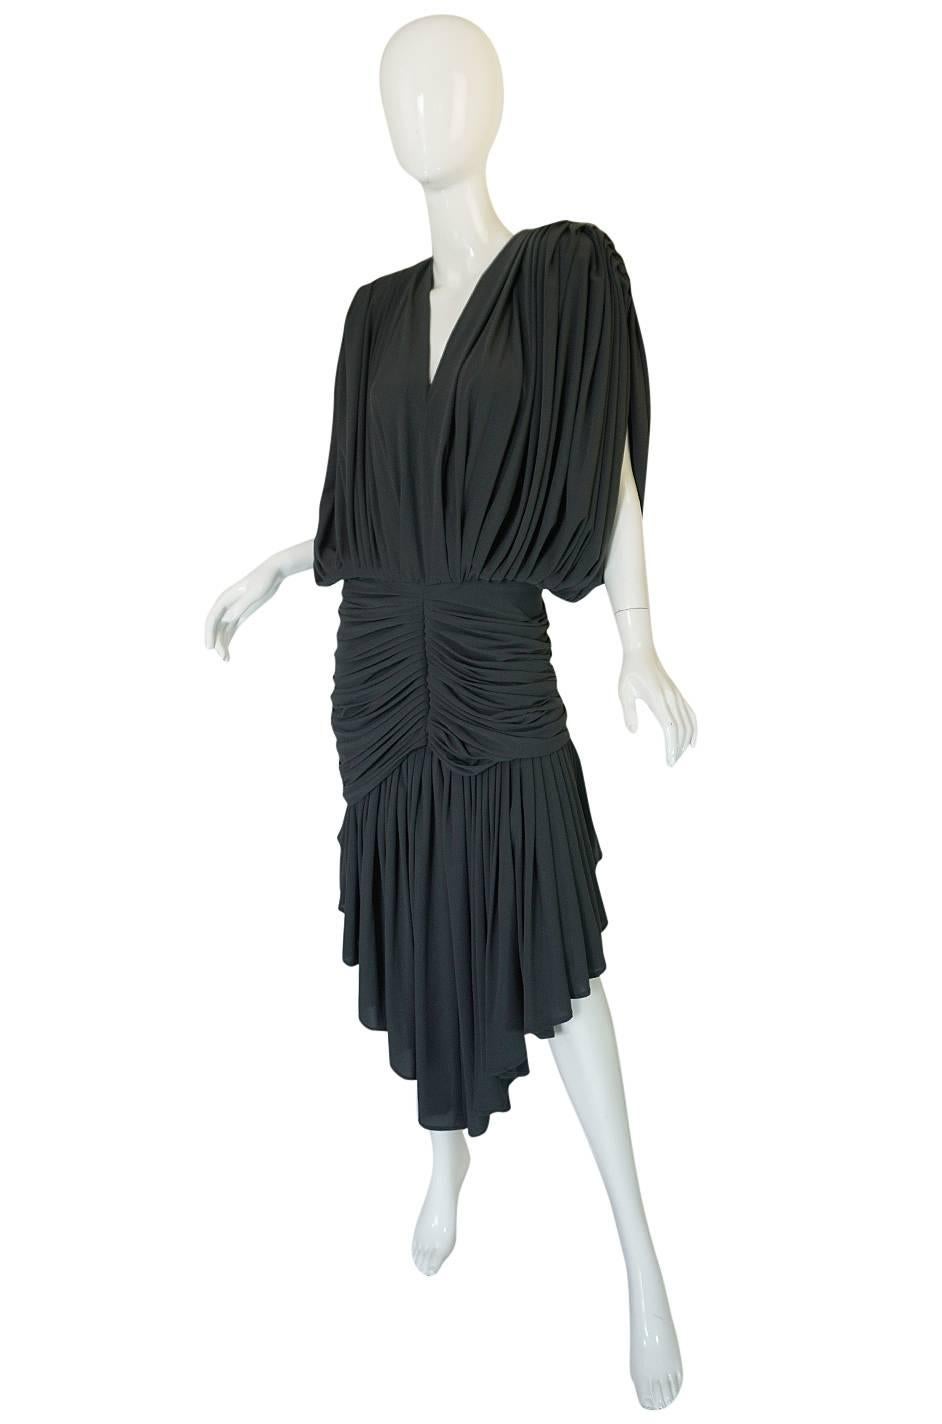 This spectacular eighties dress with its matching shawl from Norma Kamali is not only super sexy but it gives you lots of styling options and is instantly recognizable as from her. It is made from her signature slinky, lightweight jersey that she